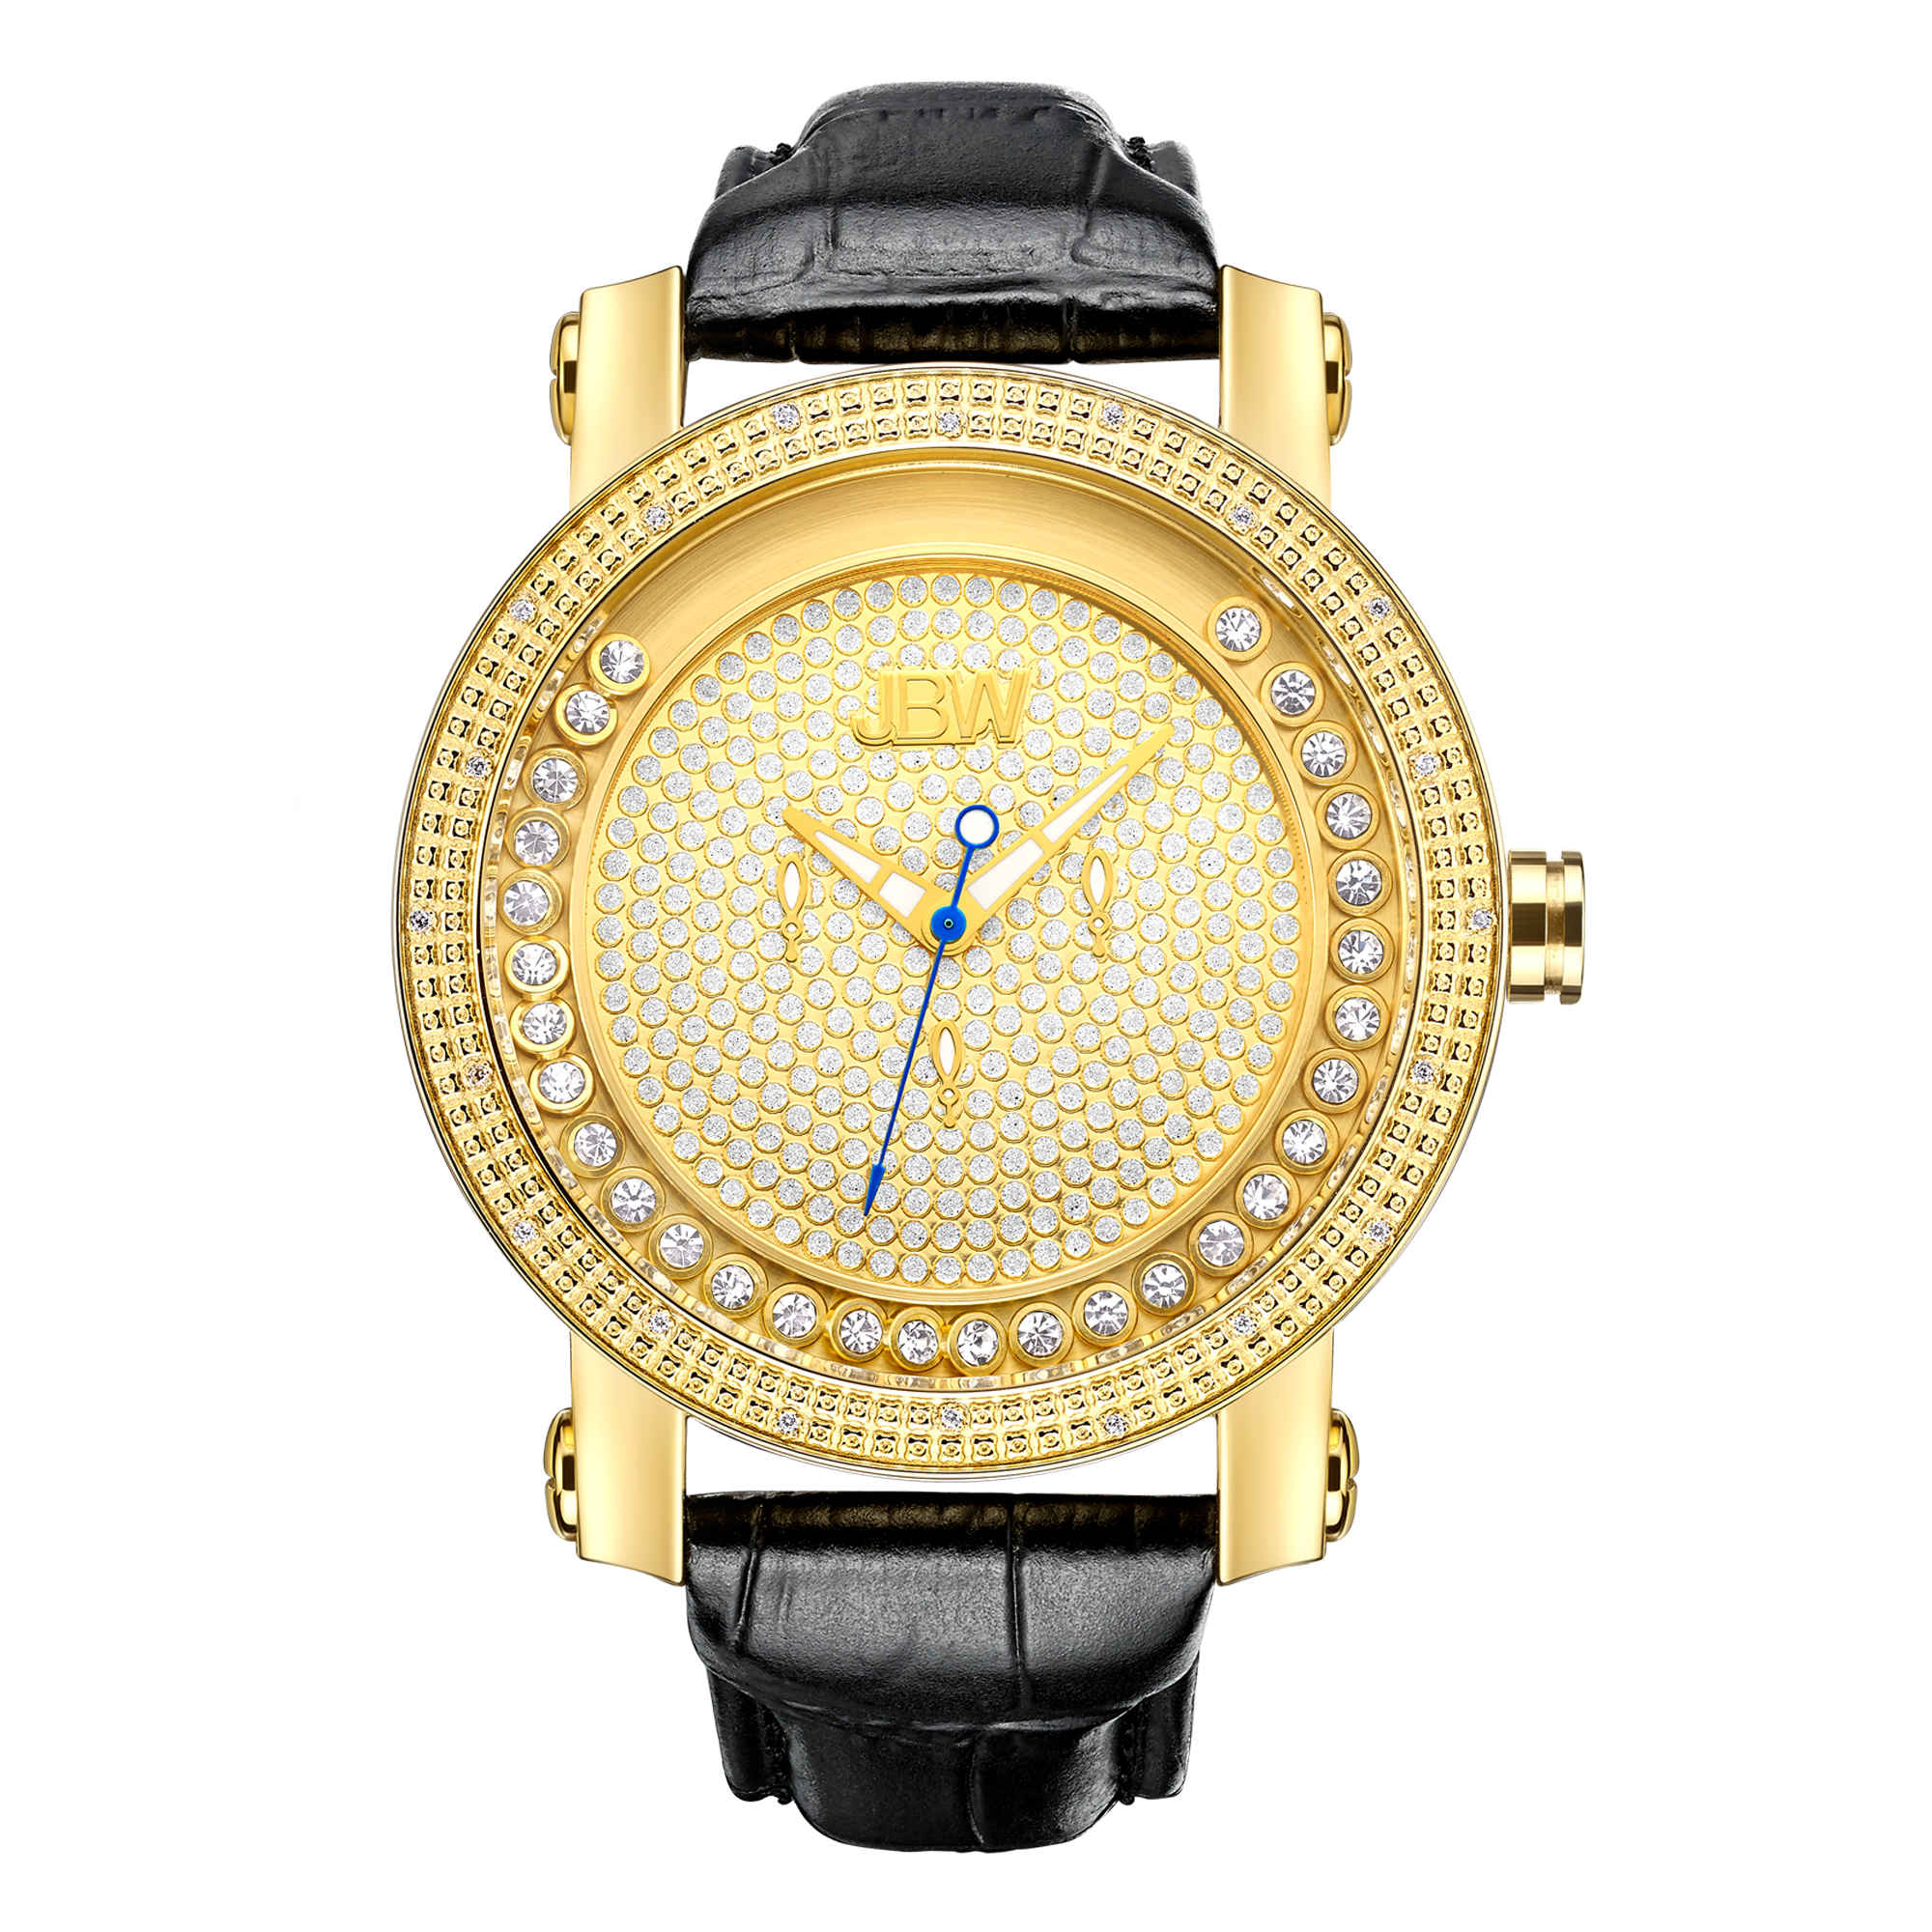 Jbw Hendrix Gold-tone Steel Case Black Leather Strap White Crystal Pave Dial Mens Watch Jb-6211l-a In Black,gold Tone,white